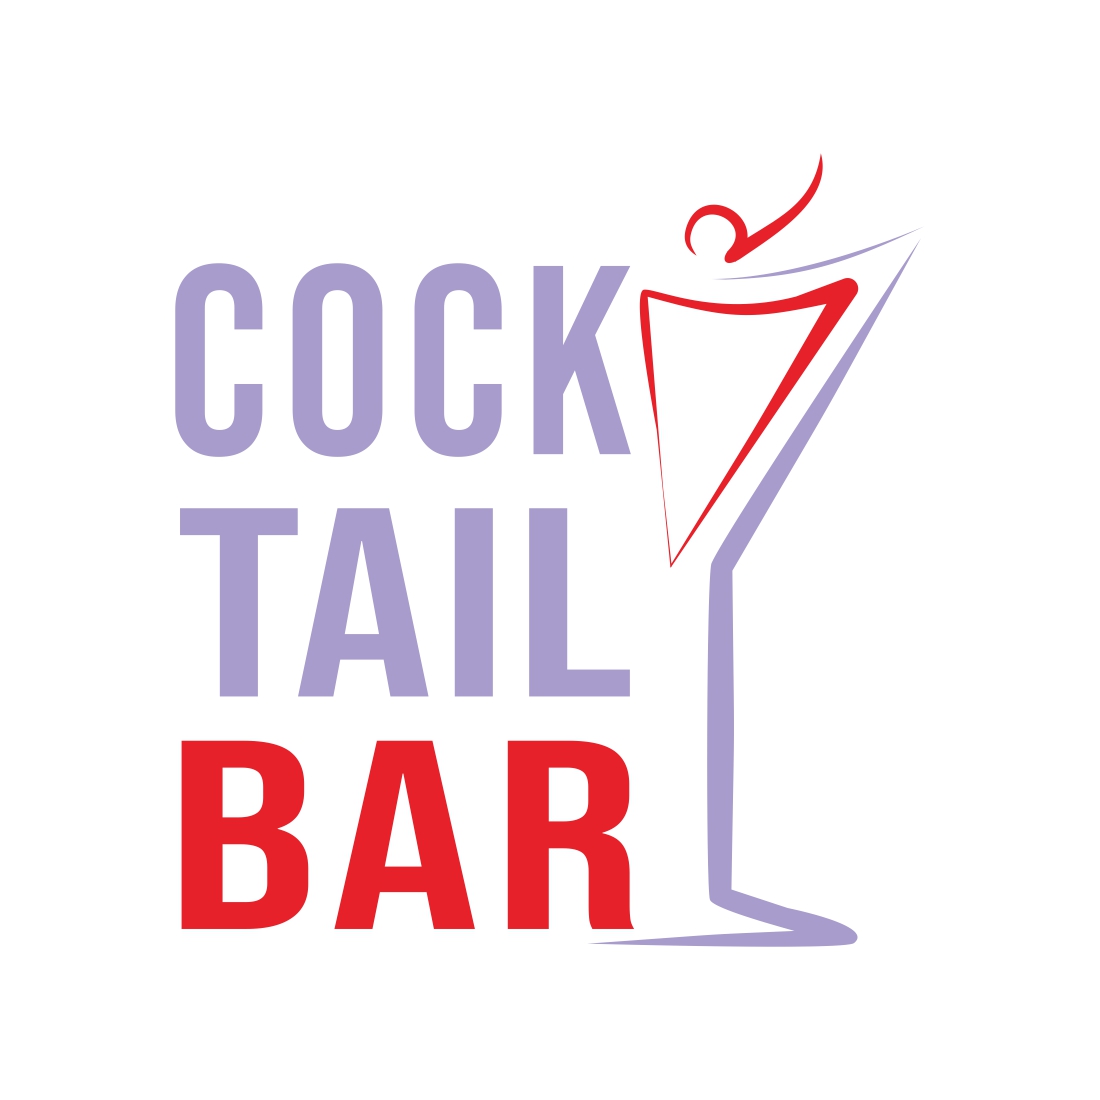 Drink served in bars and restaurants around the world >> ONLY 11$ cover image.